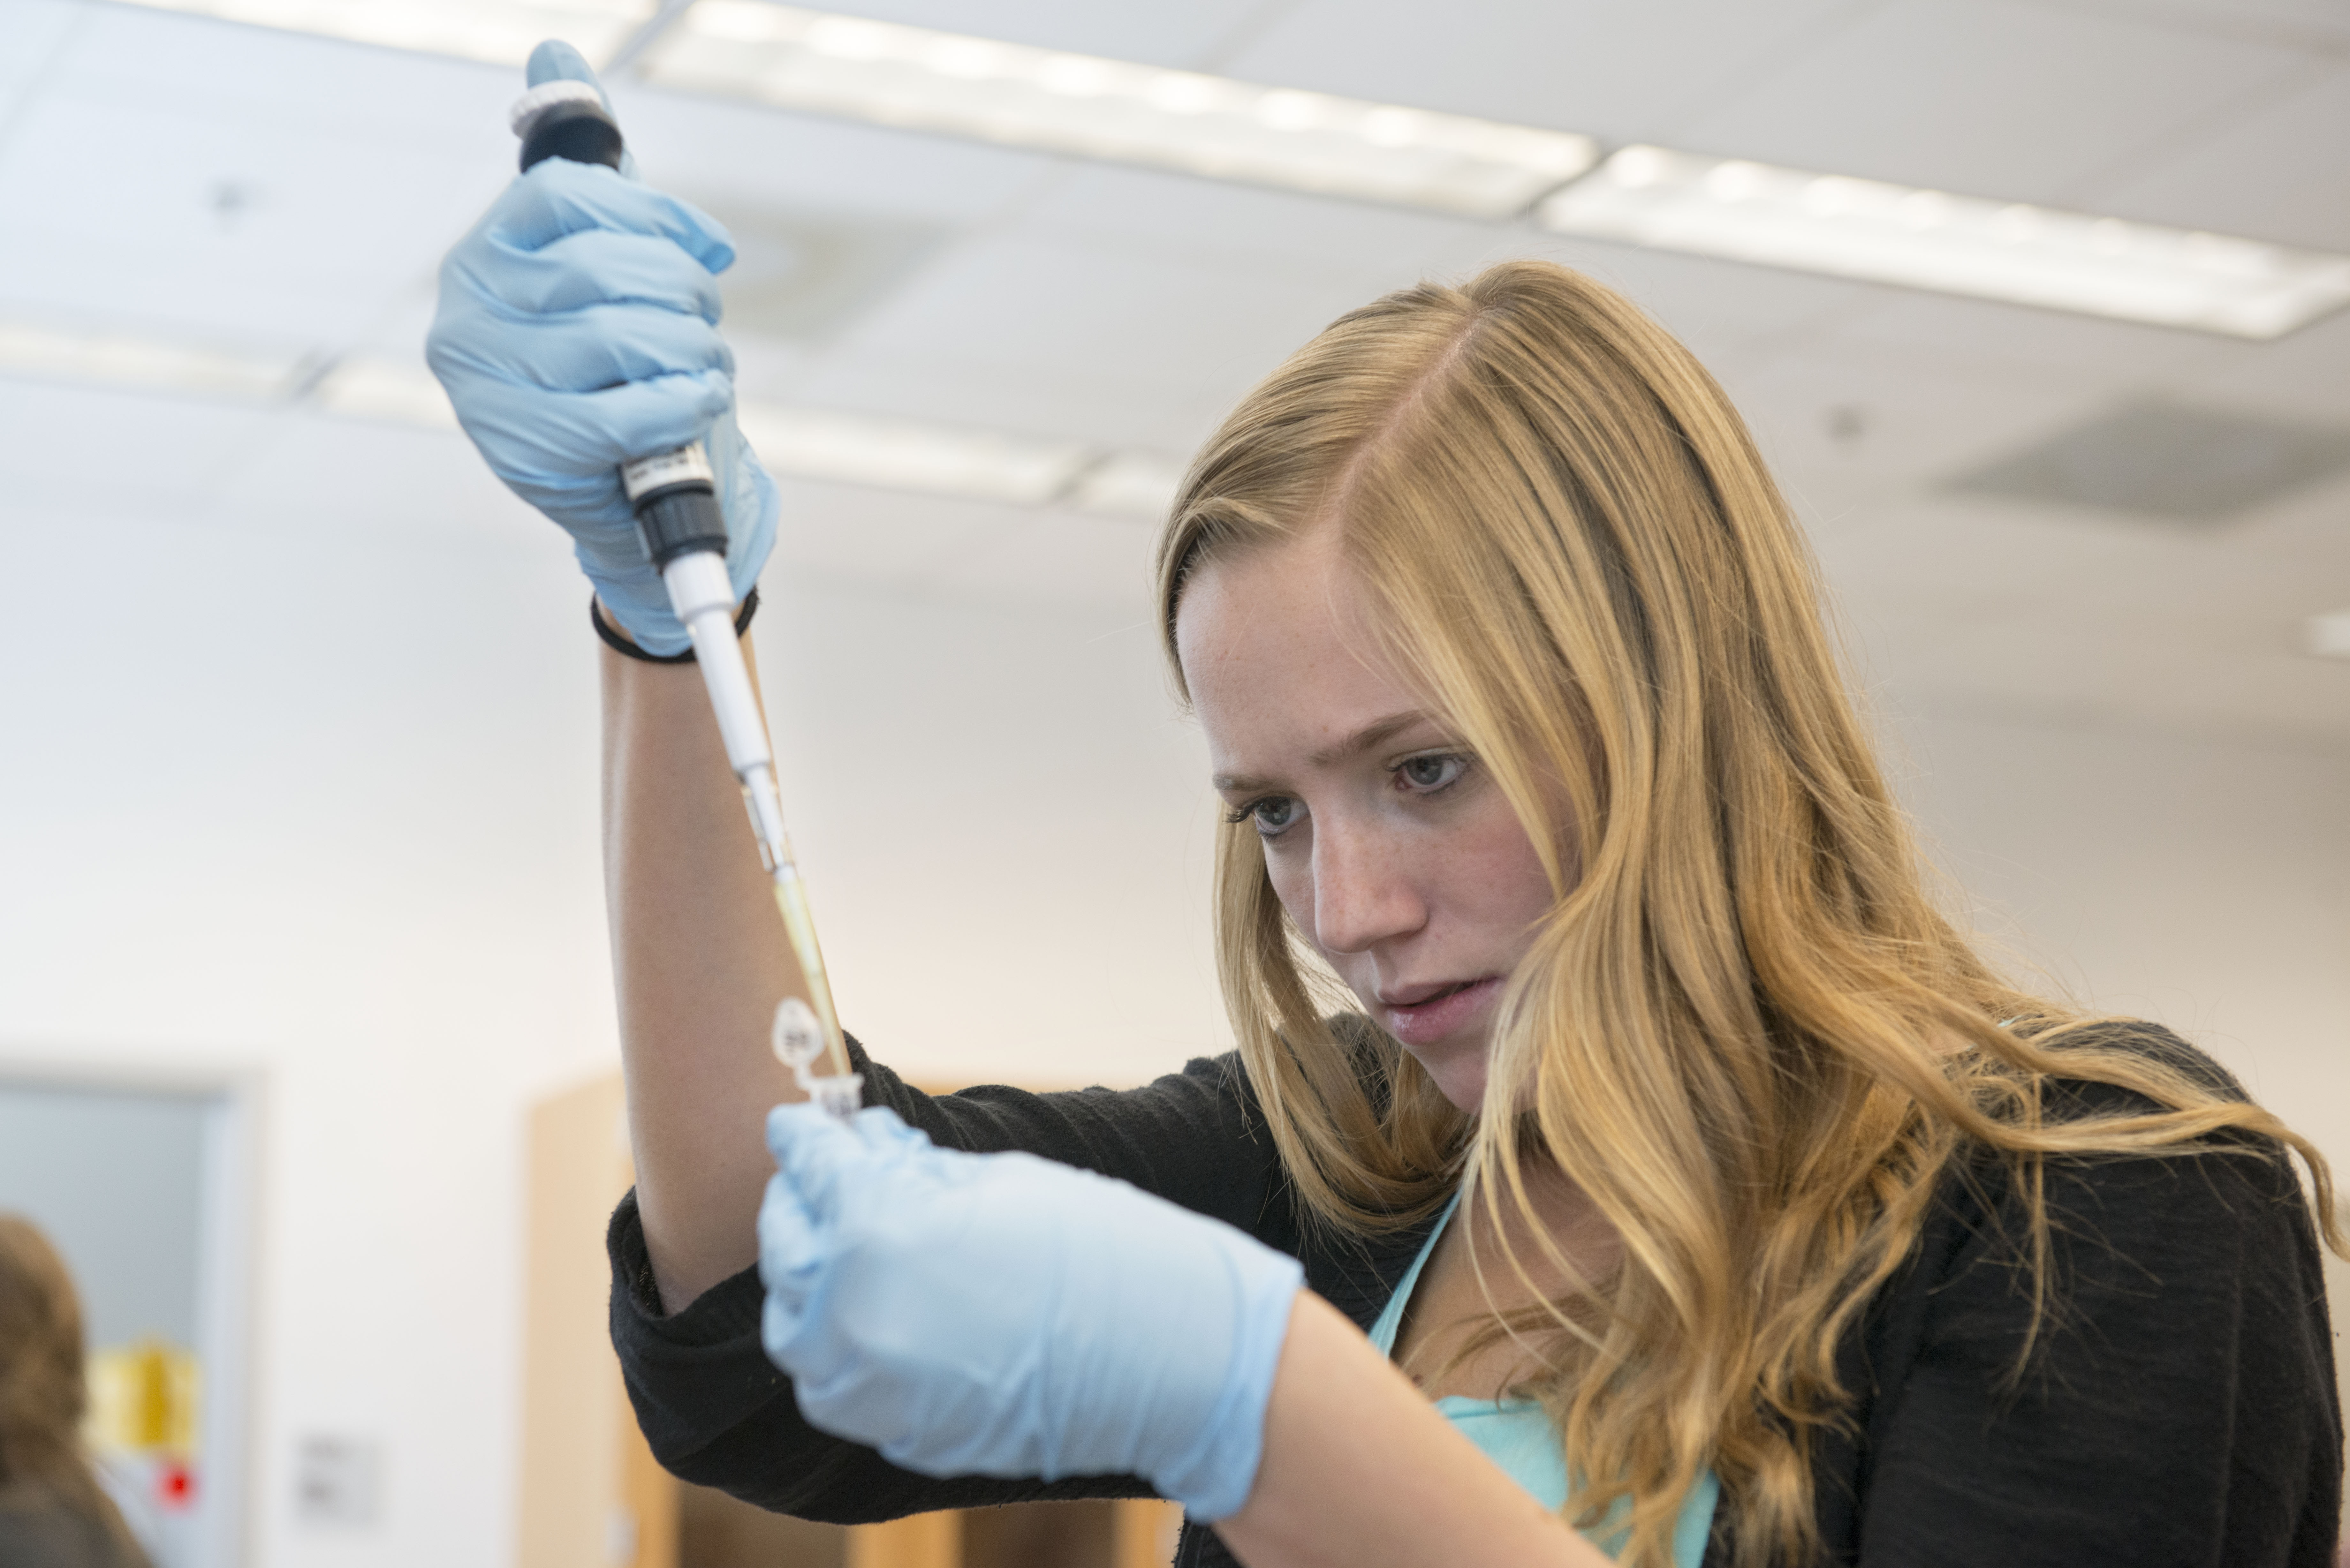 An exercise science student uses a pipette in a lab. Explore exercise science at Elon and discover rewarding exercise scientist jobs.